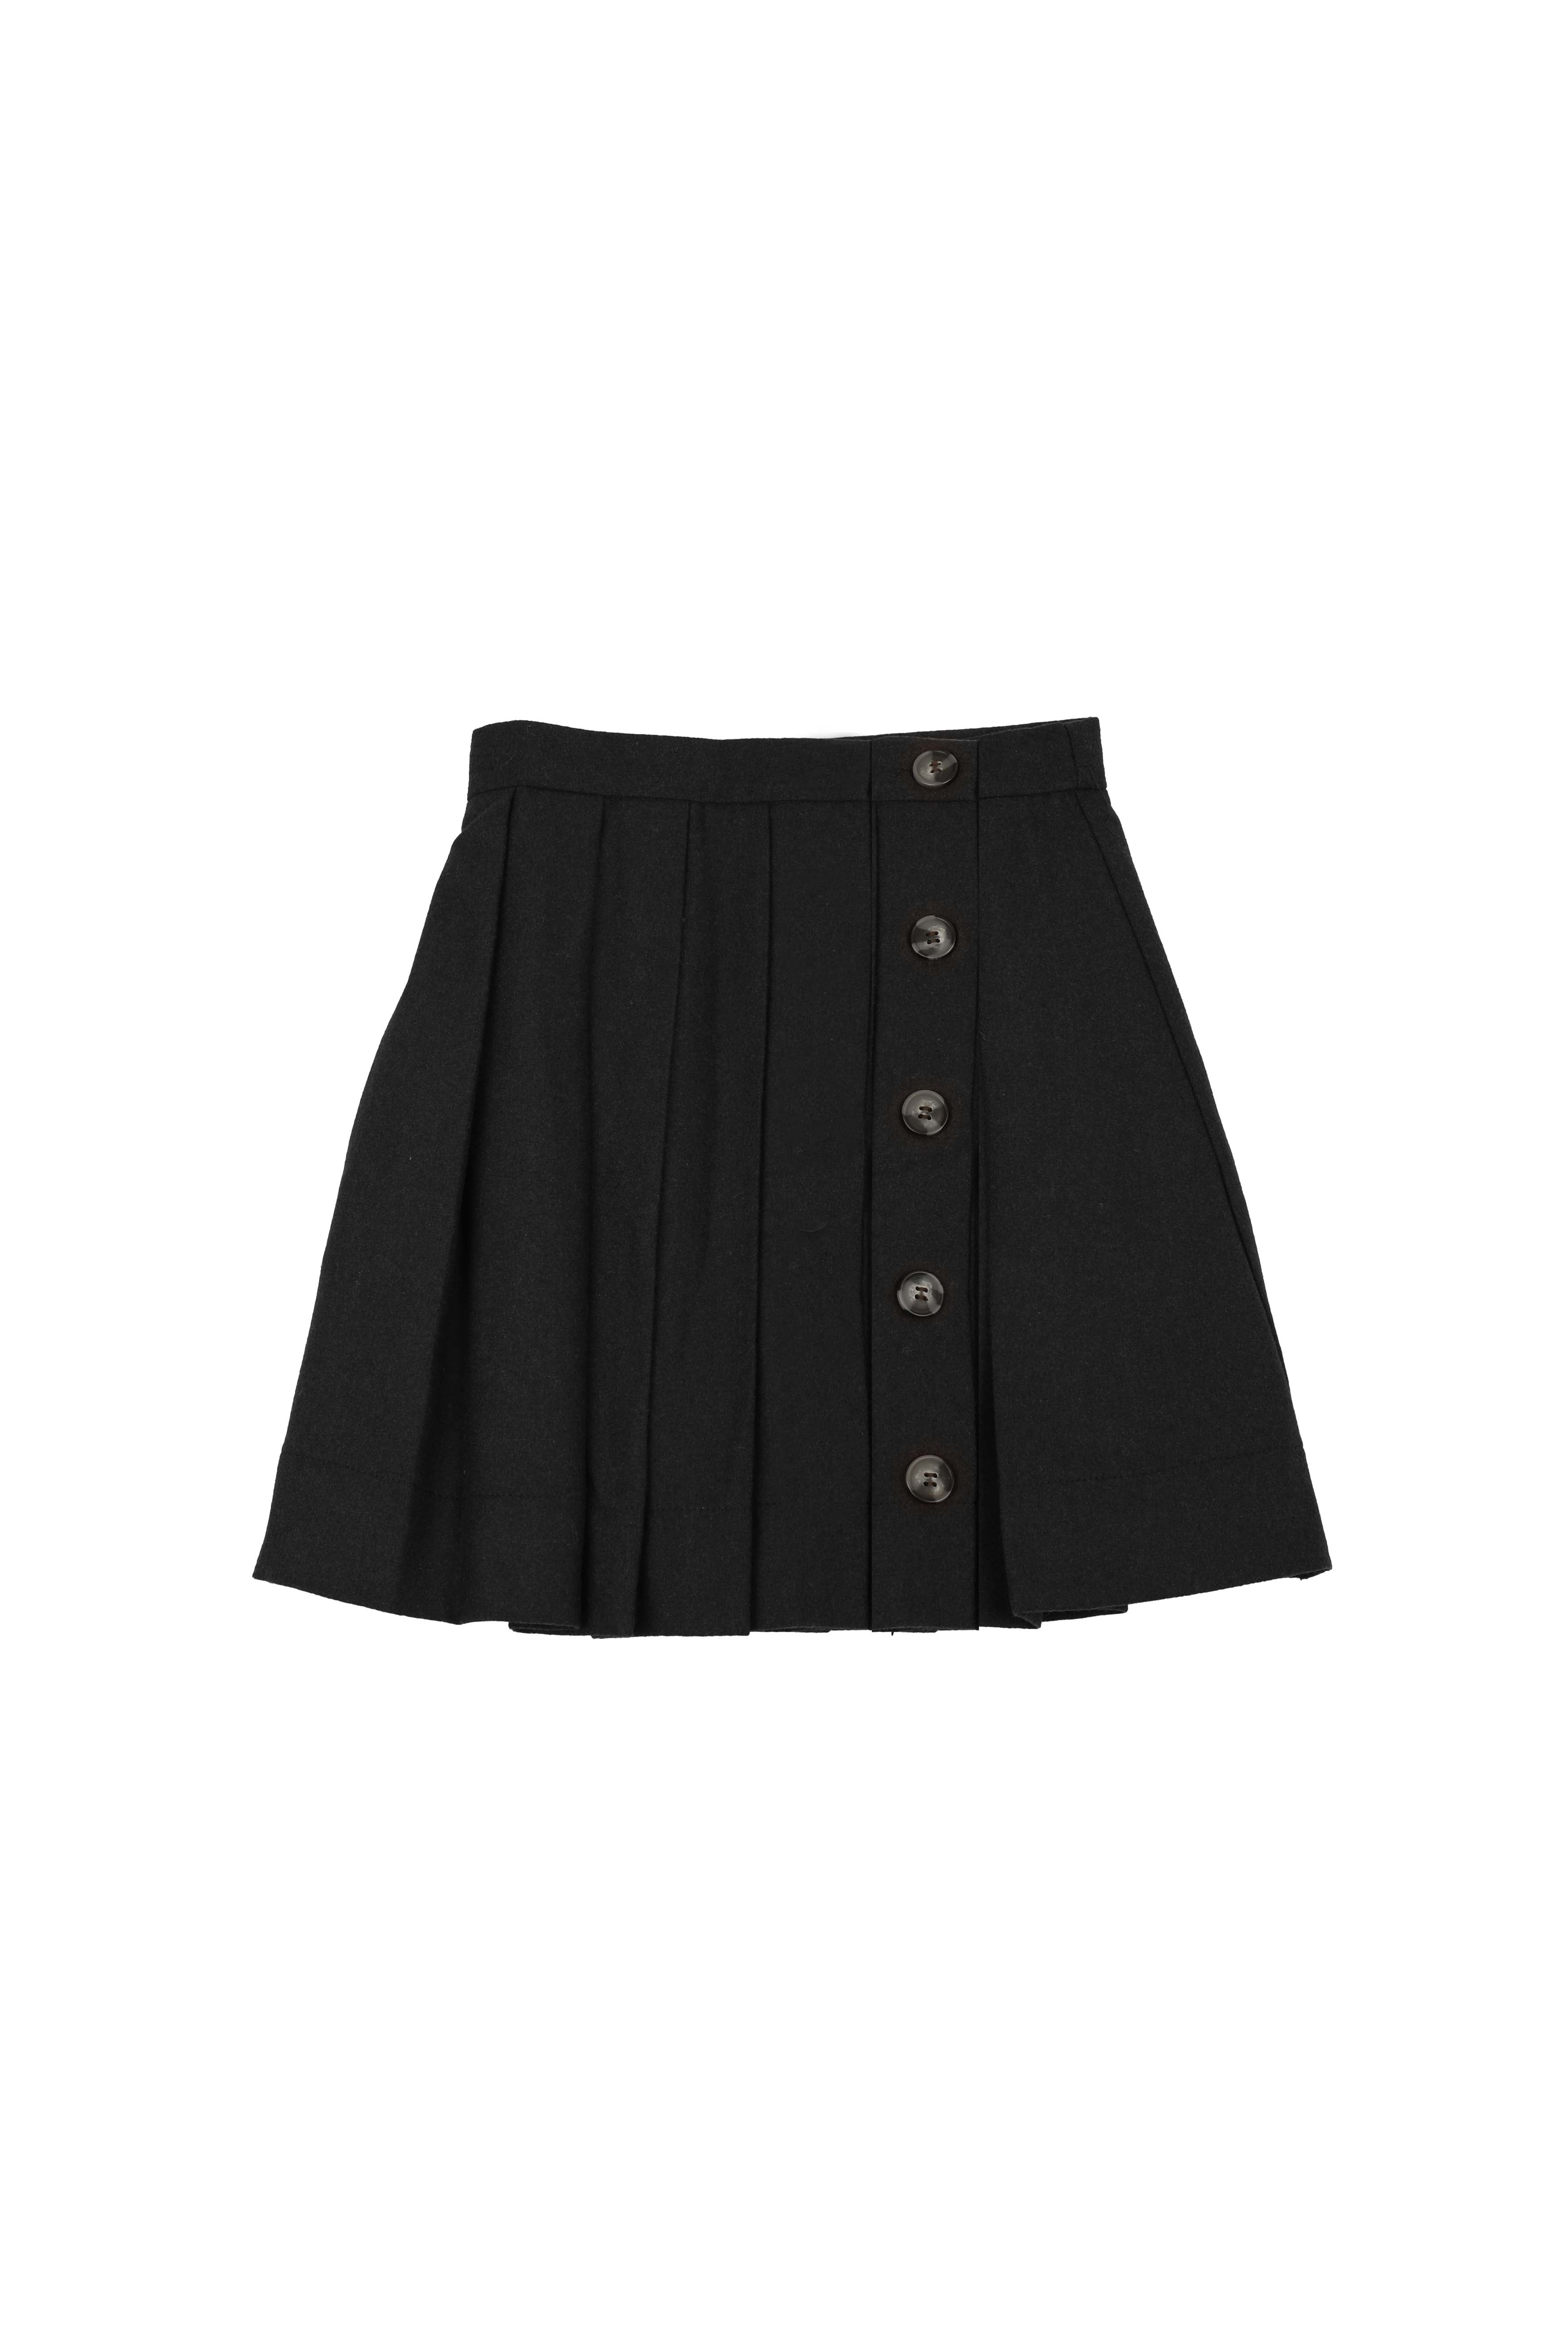 Belati Black Pleated Skirt with Side Buttons – Panda and Cub